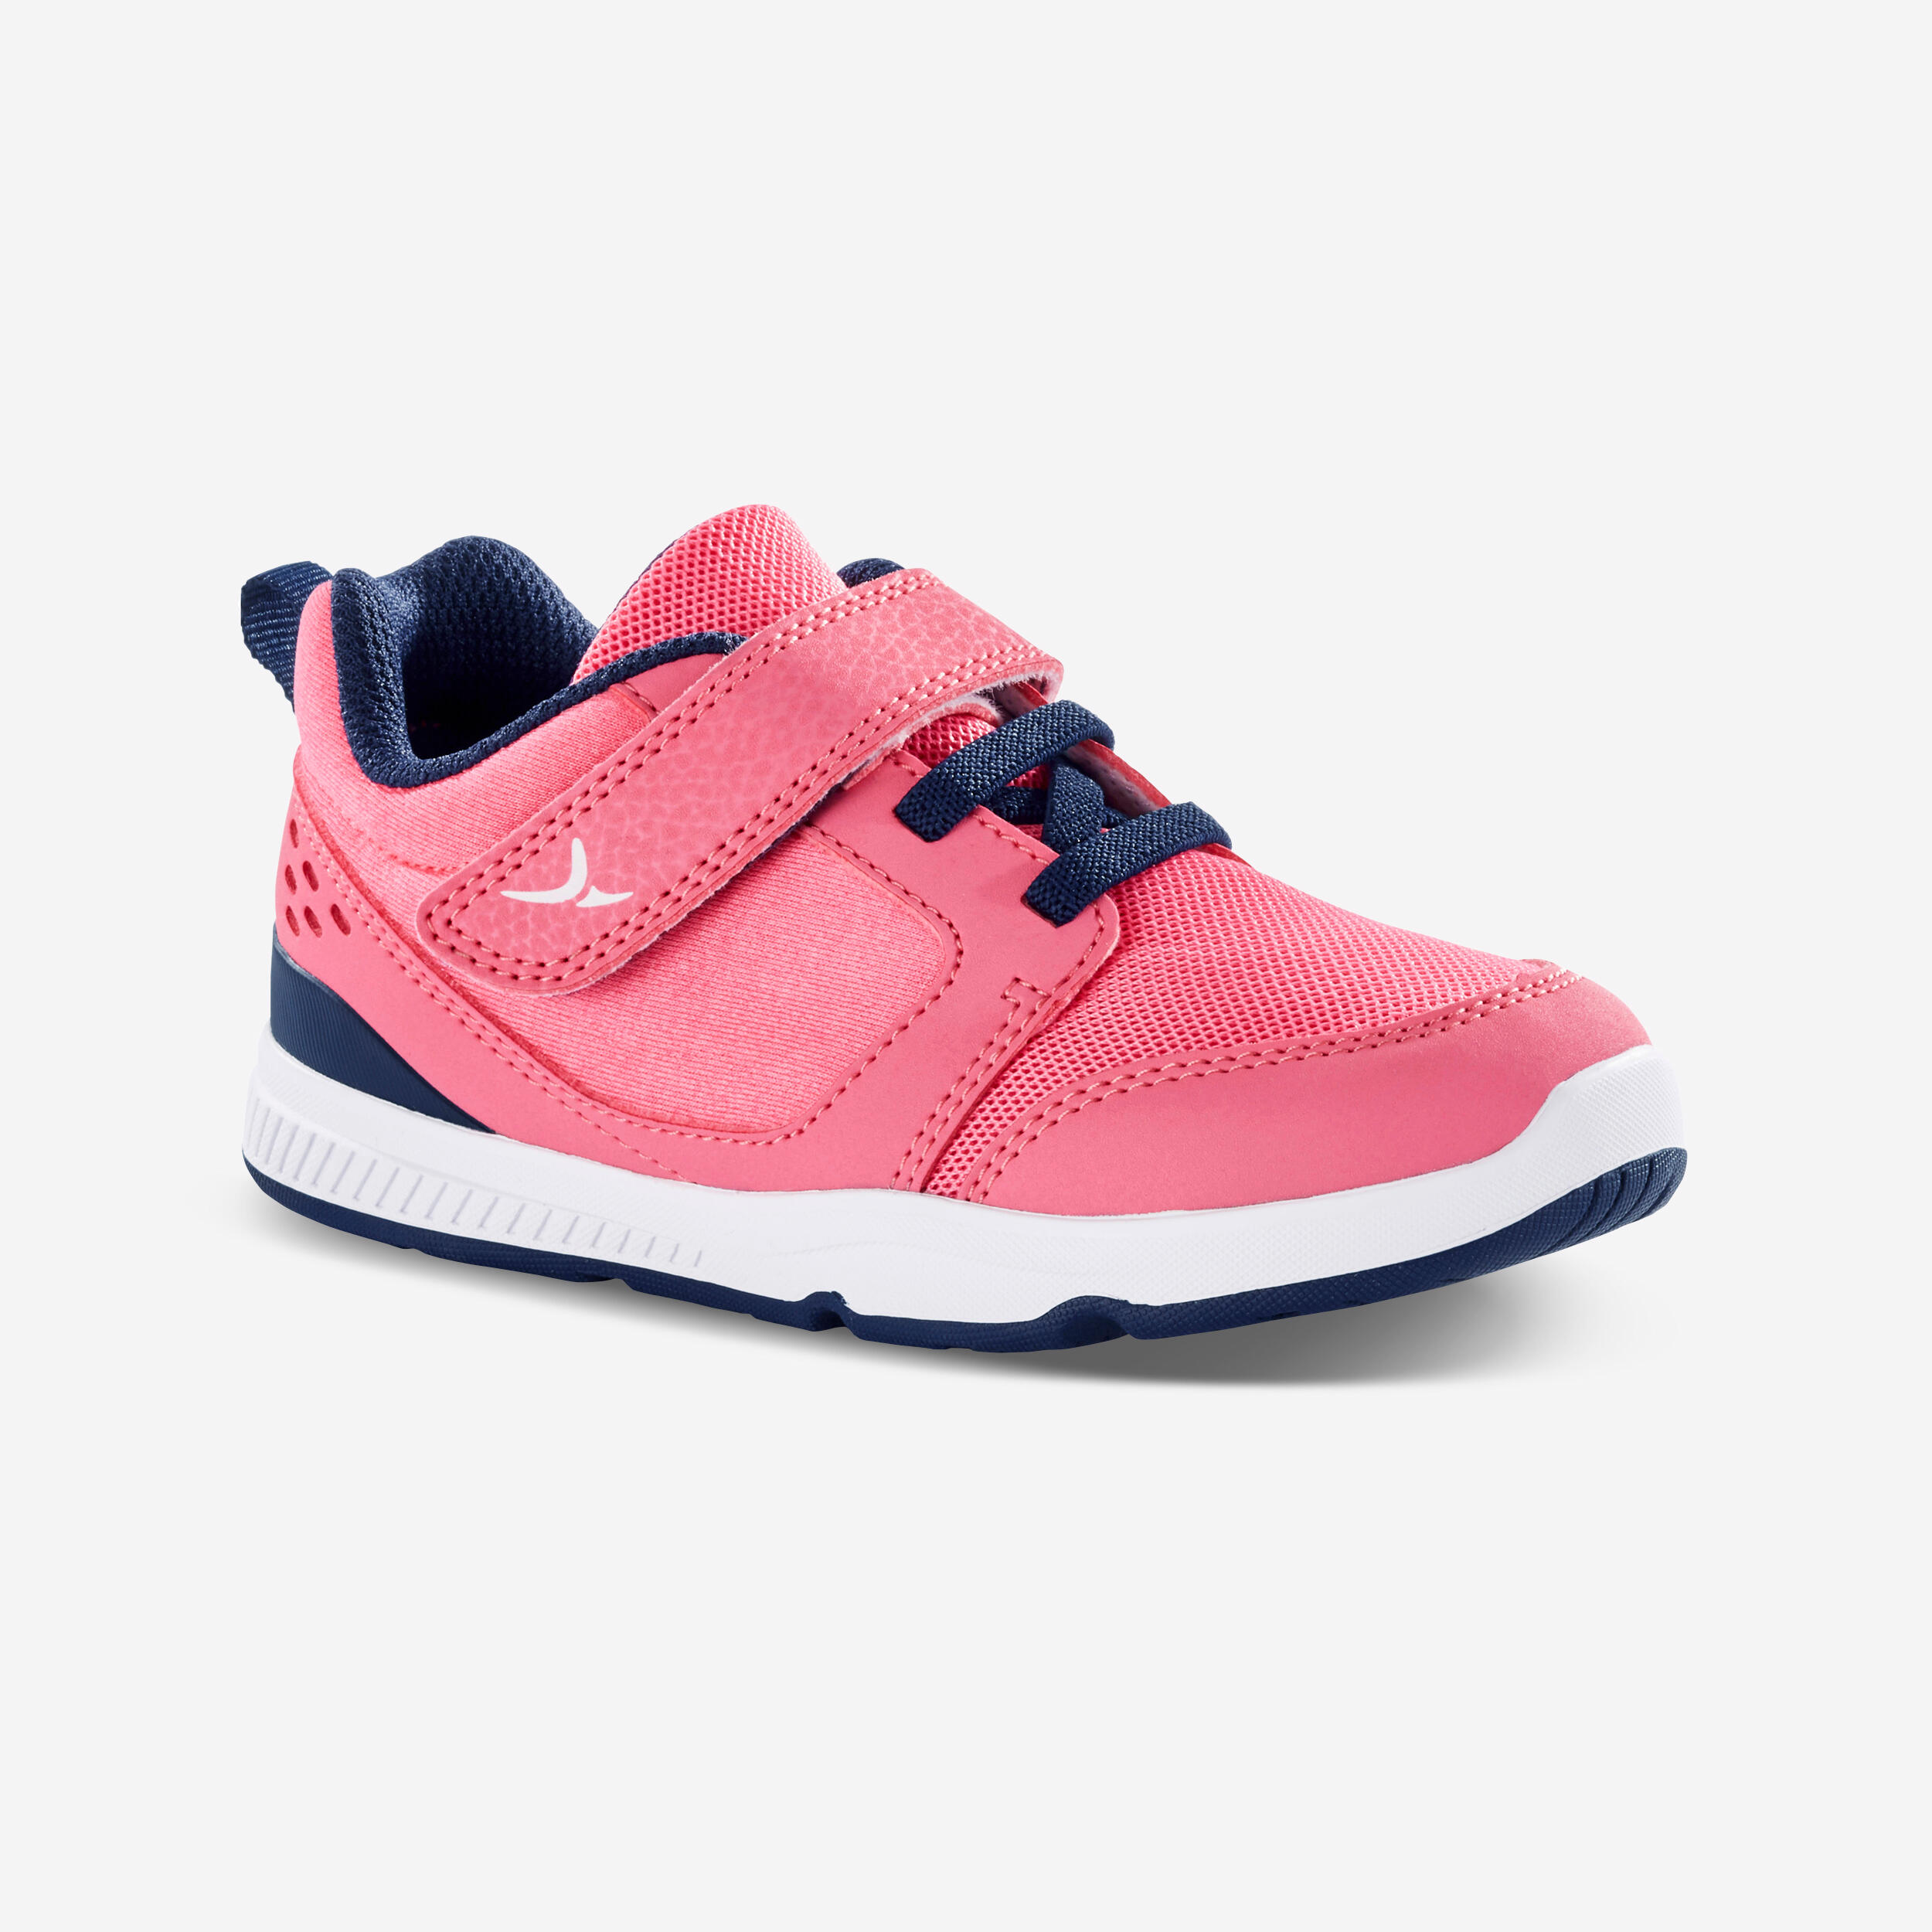 Kids' Comfortable and Breathable Shoes 1/8